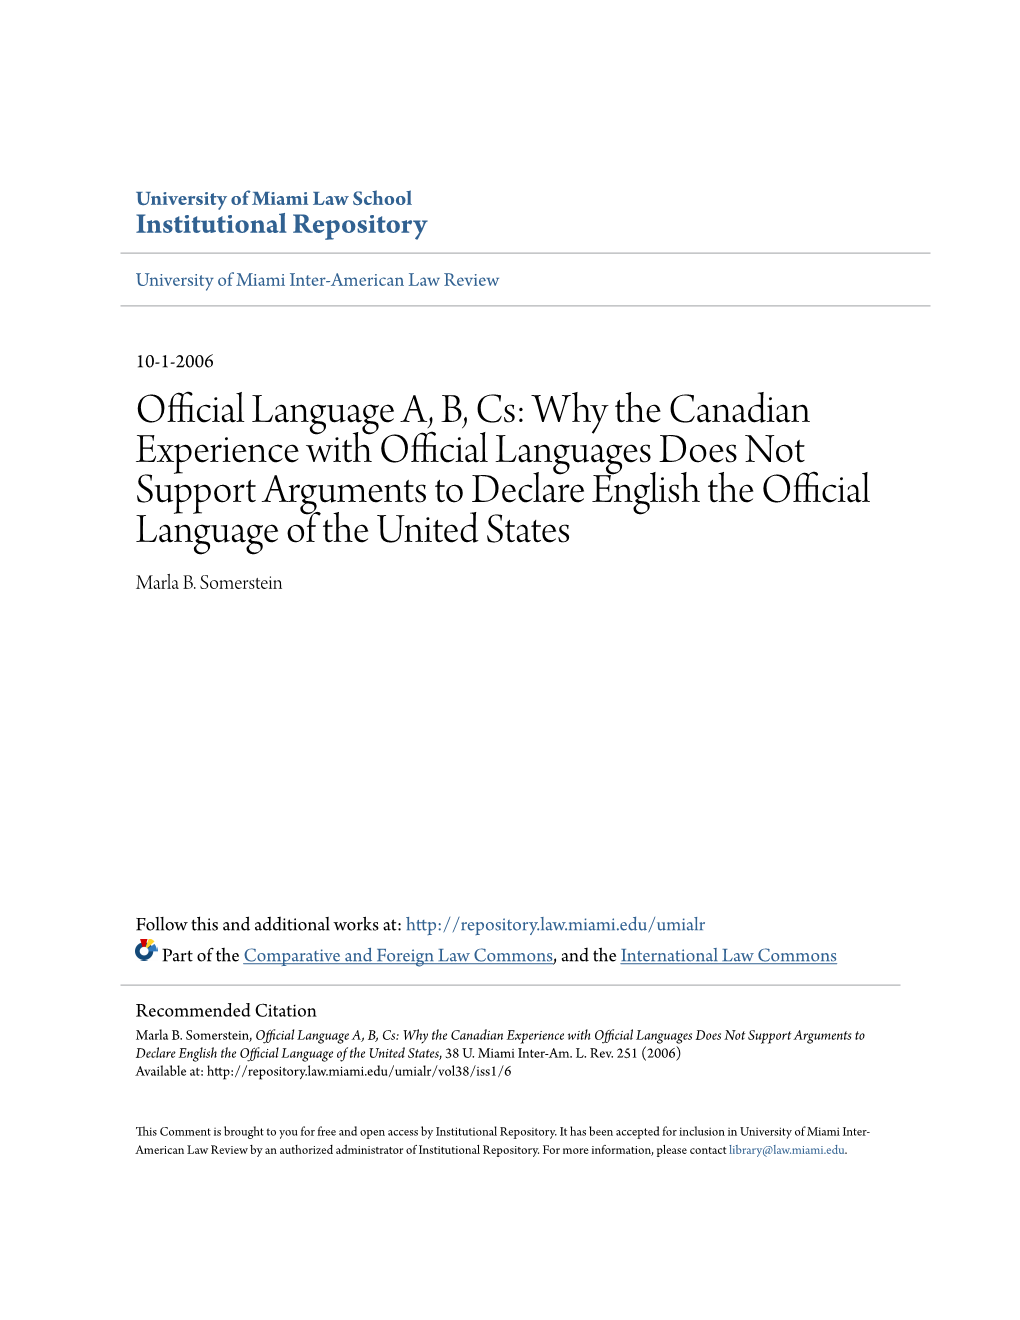 Why the Canadian Experience with Official Languages Does Not Support Arguments to Declare English the Official Language of the United States Marla B